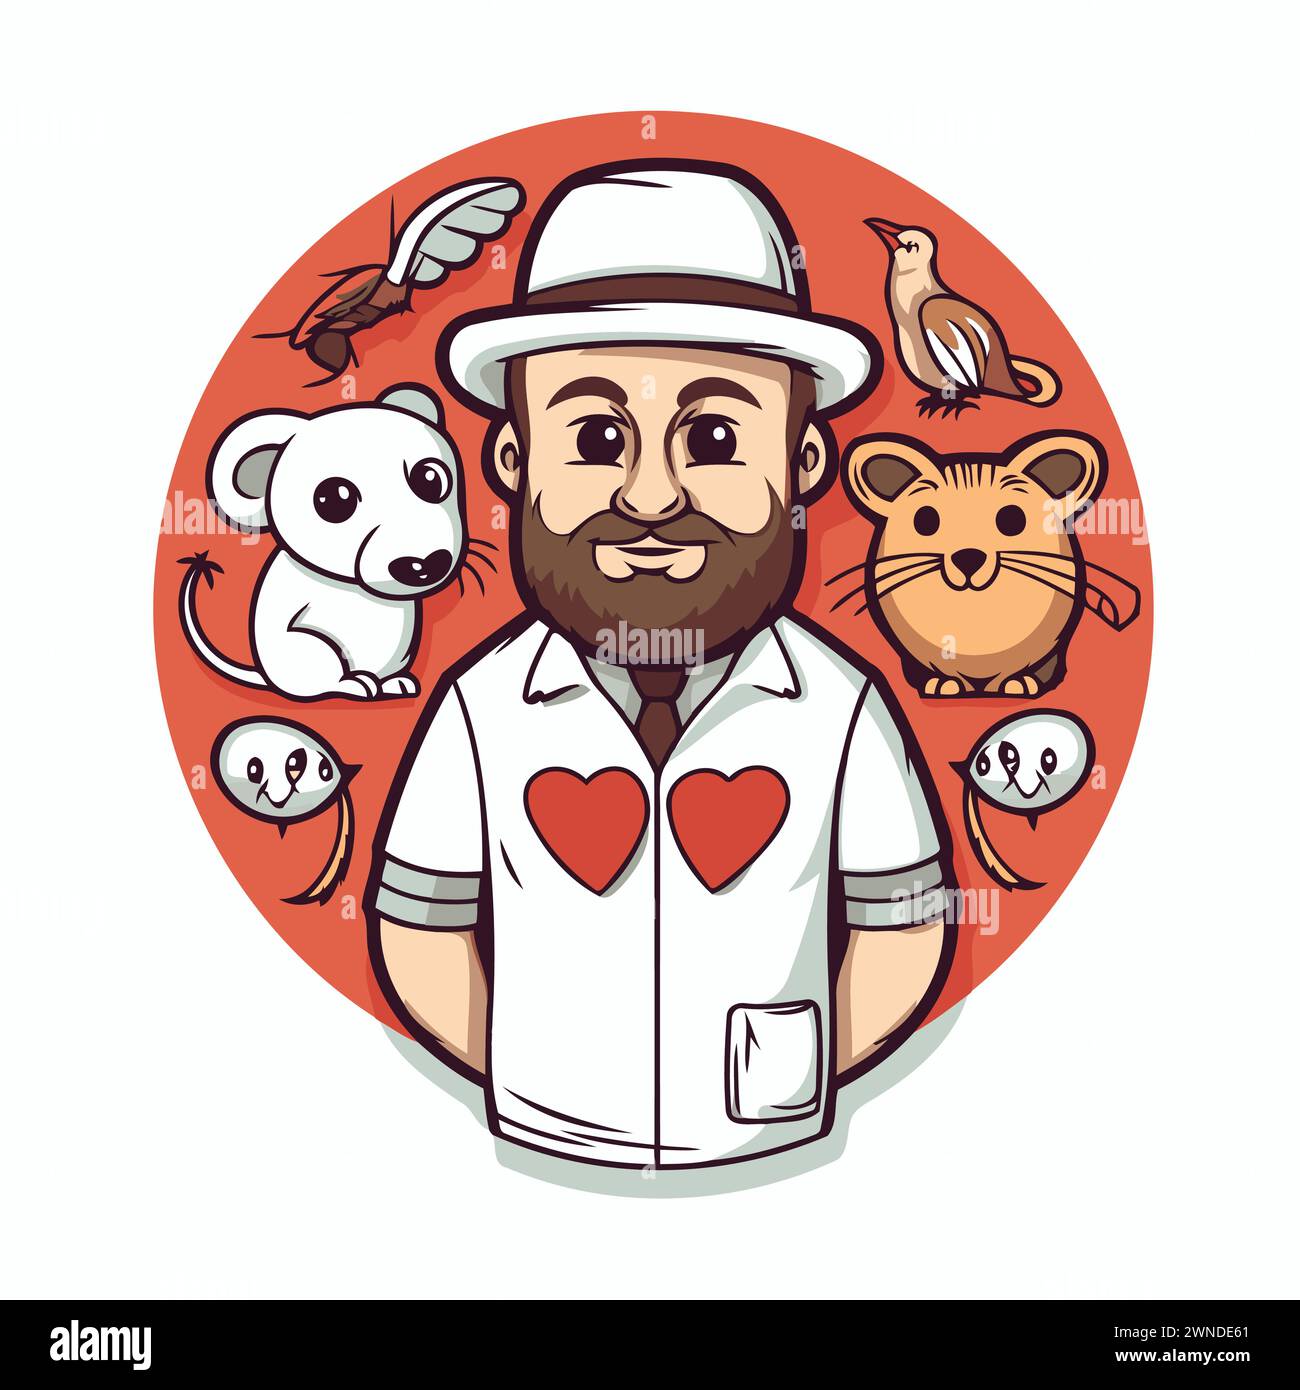 Vector illustration of a cartoon doctor with a beard and mustache wearing a white coat and a hat with a set of animals. Stock Vector